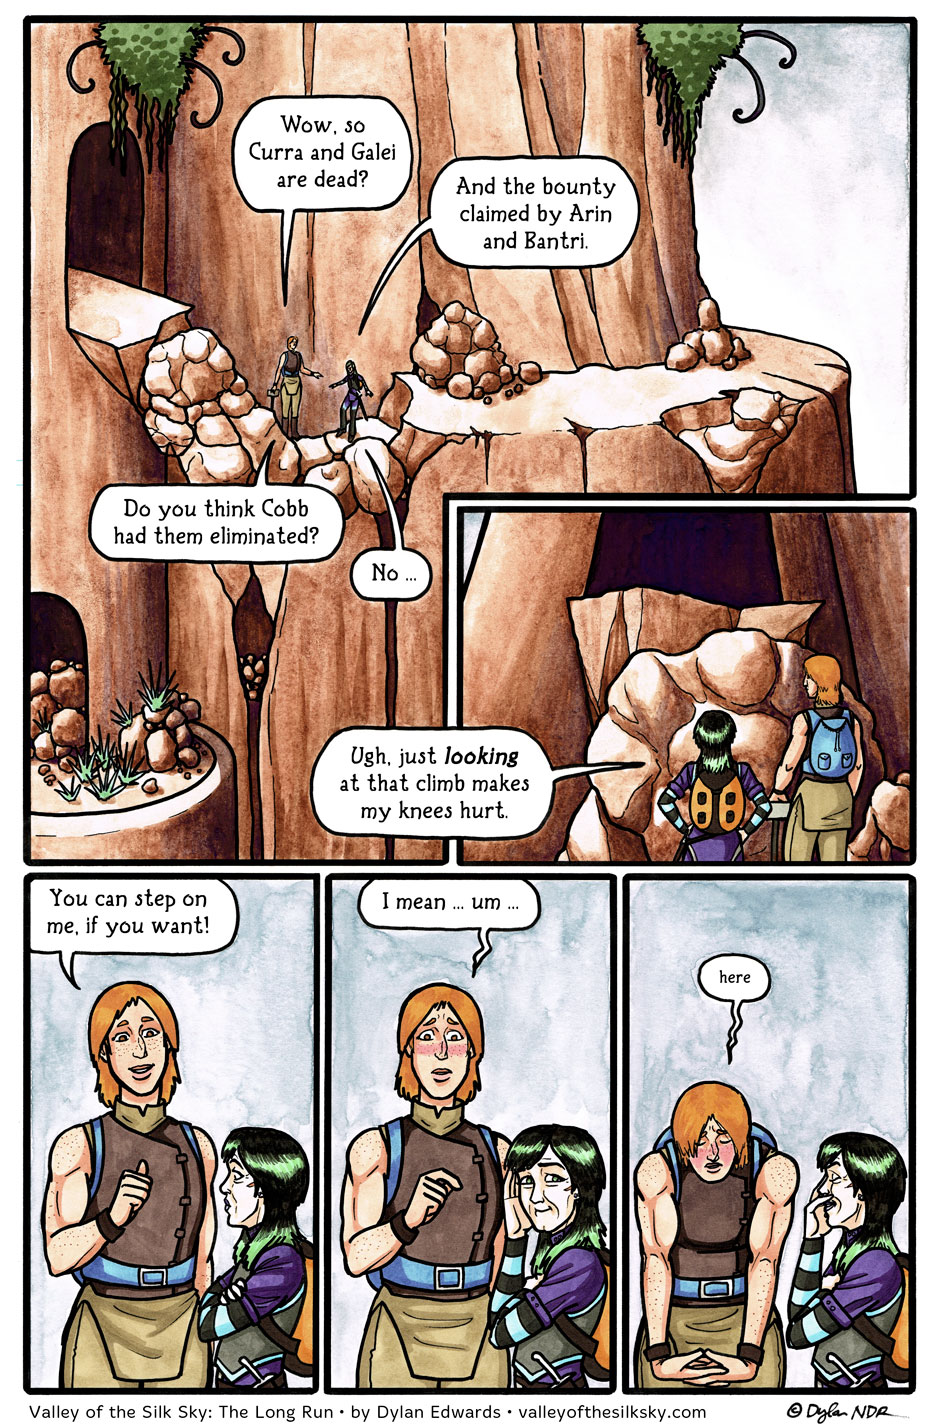 Valley of the Silk Sky queer YA sci-fi fantasy webcomic